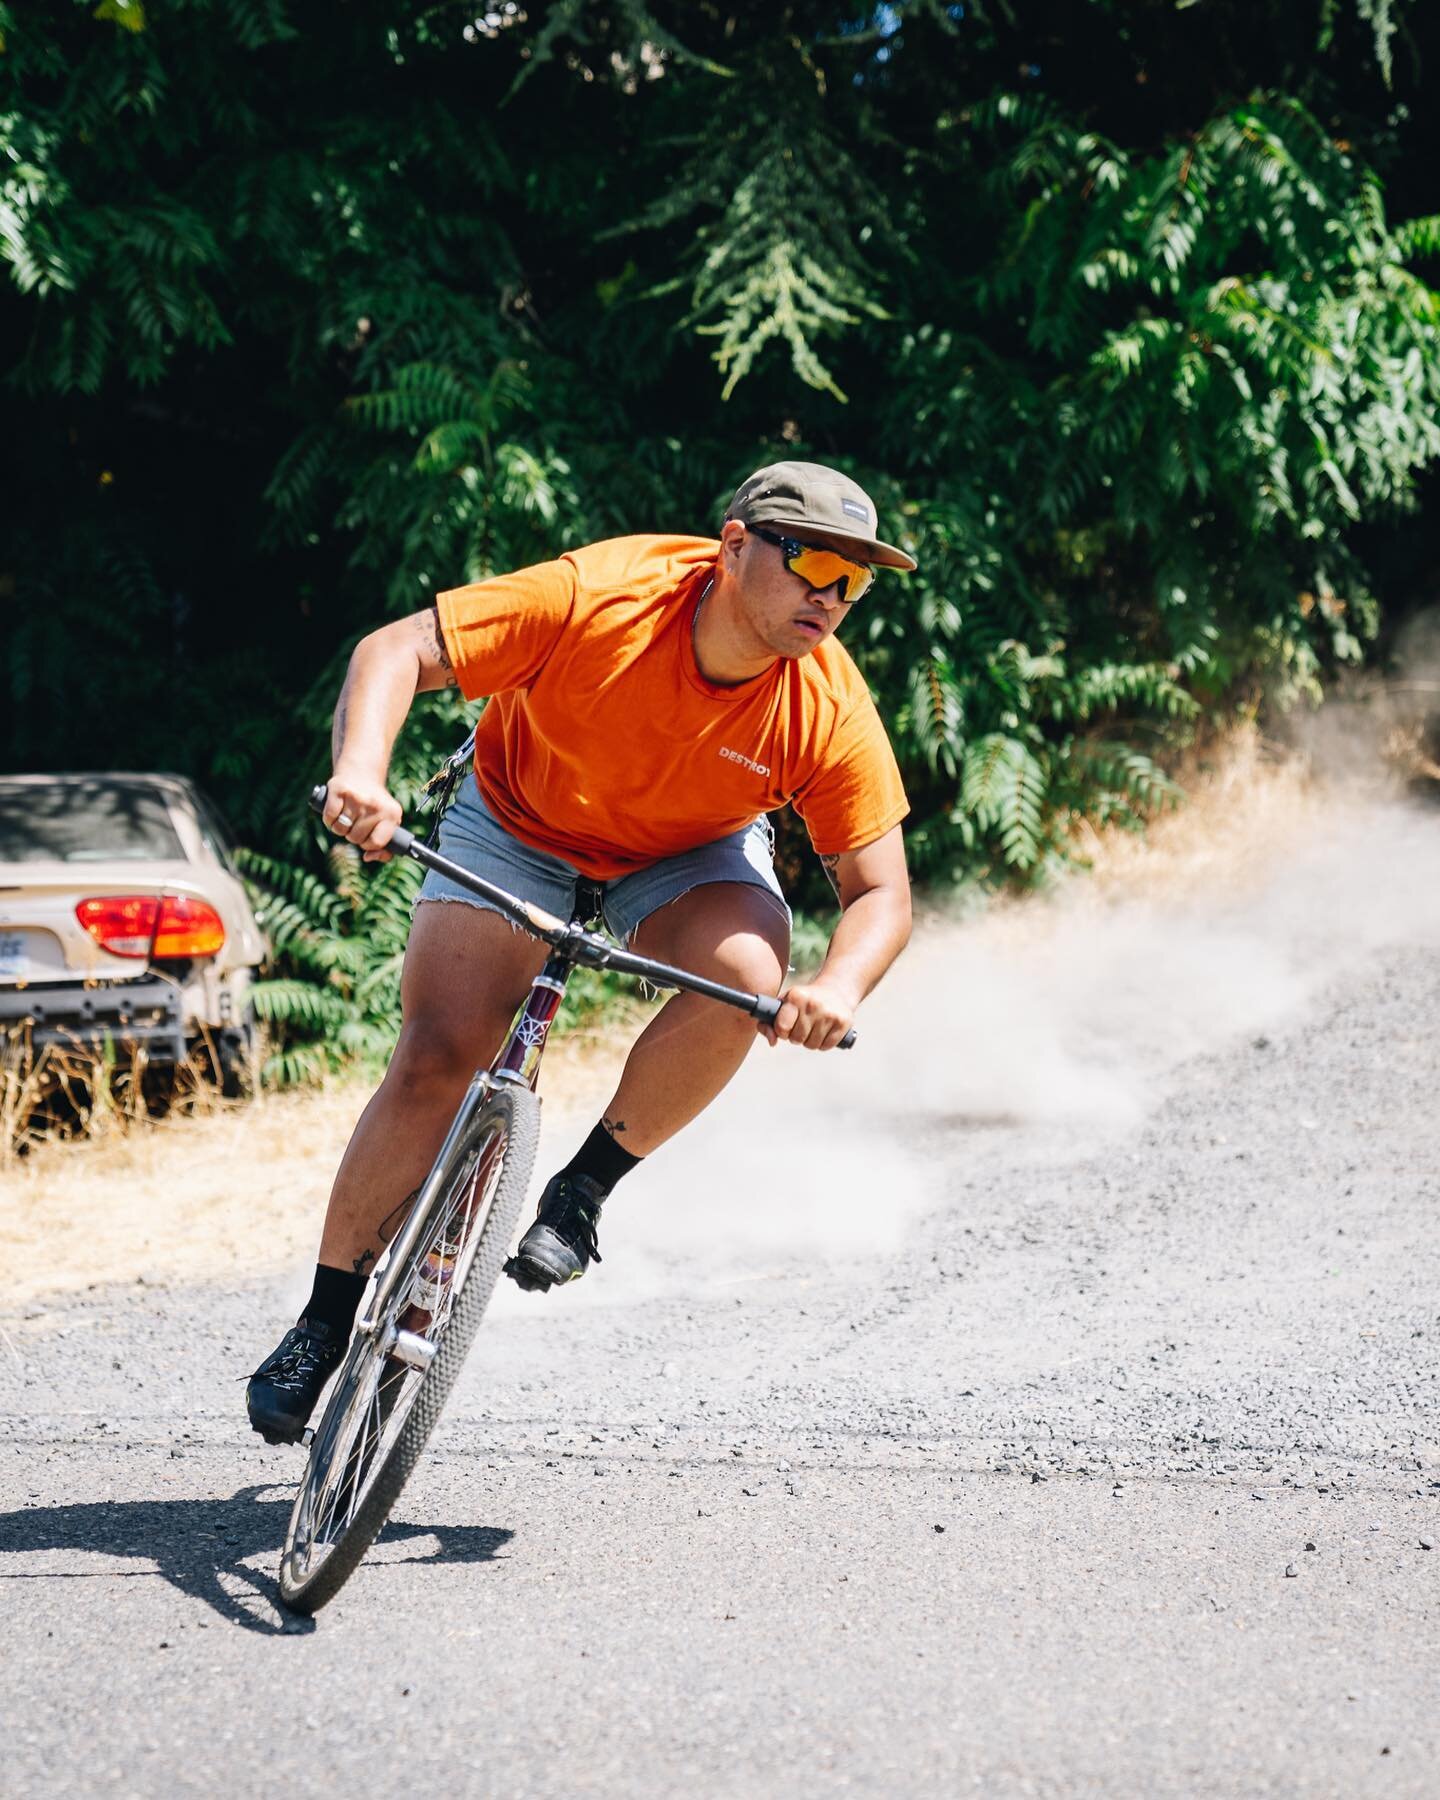 We love kicking up dust whenever we can. #destroy 😈 
.
A quick descent by @badnxws on a well loved gravel road. 

The Shop Logo T-Shirt
Comfort while riding, perfect for work in the shop or a simple go to daily.
.
.
PDX BUILT//AMERICAN MADE
.
#destr